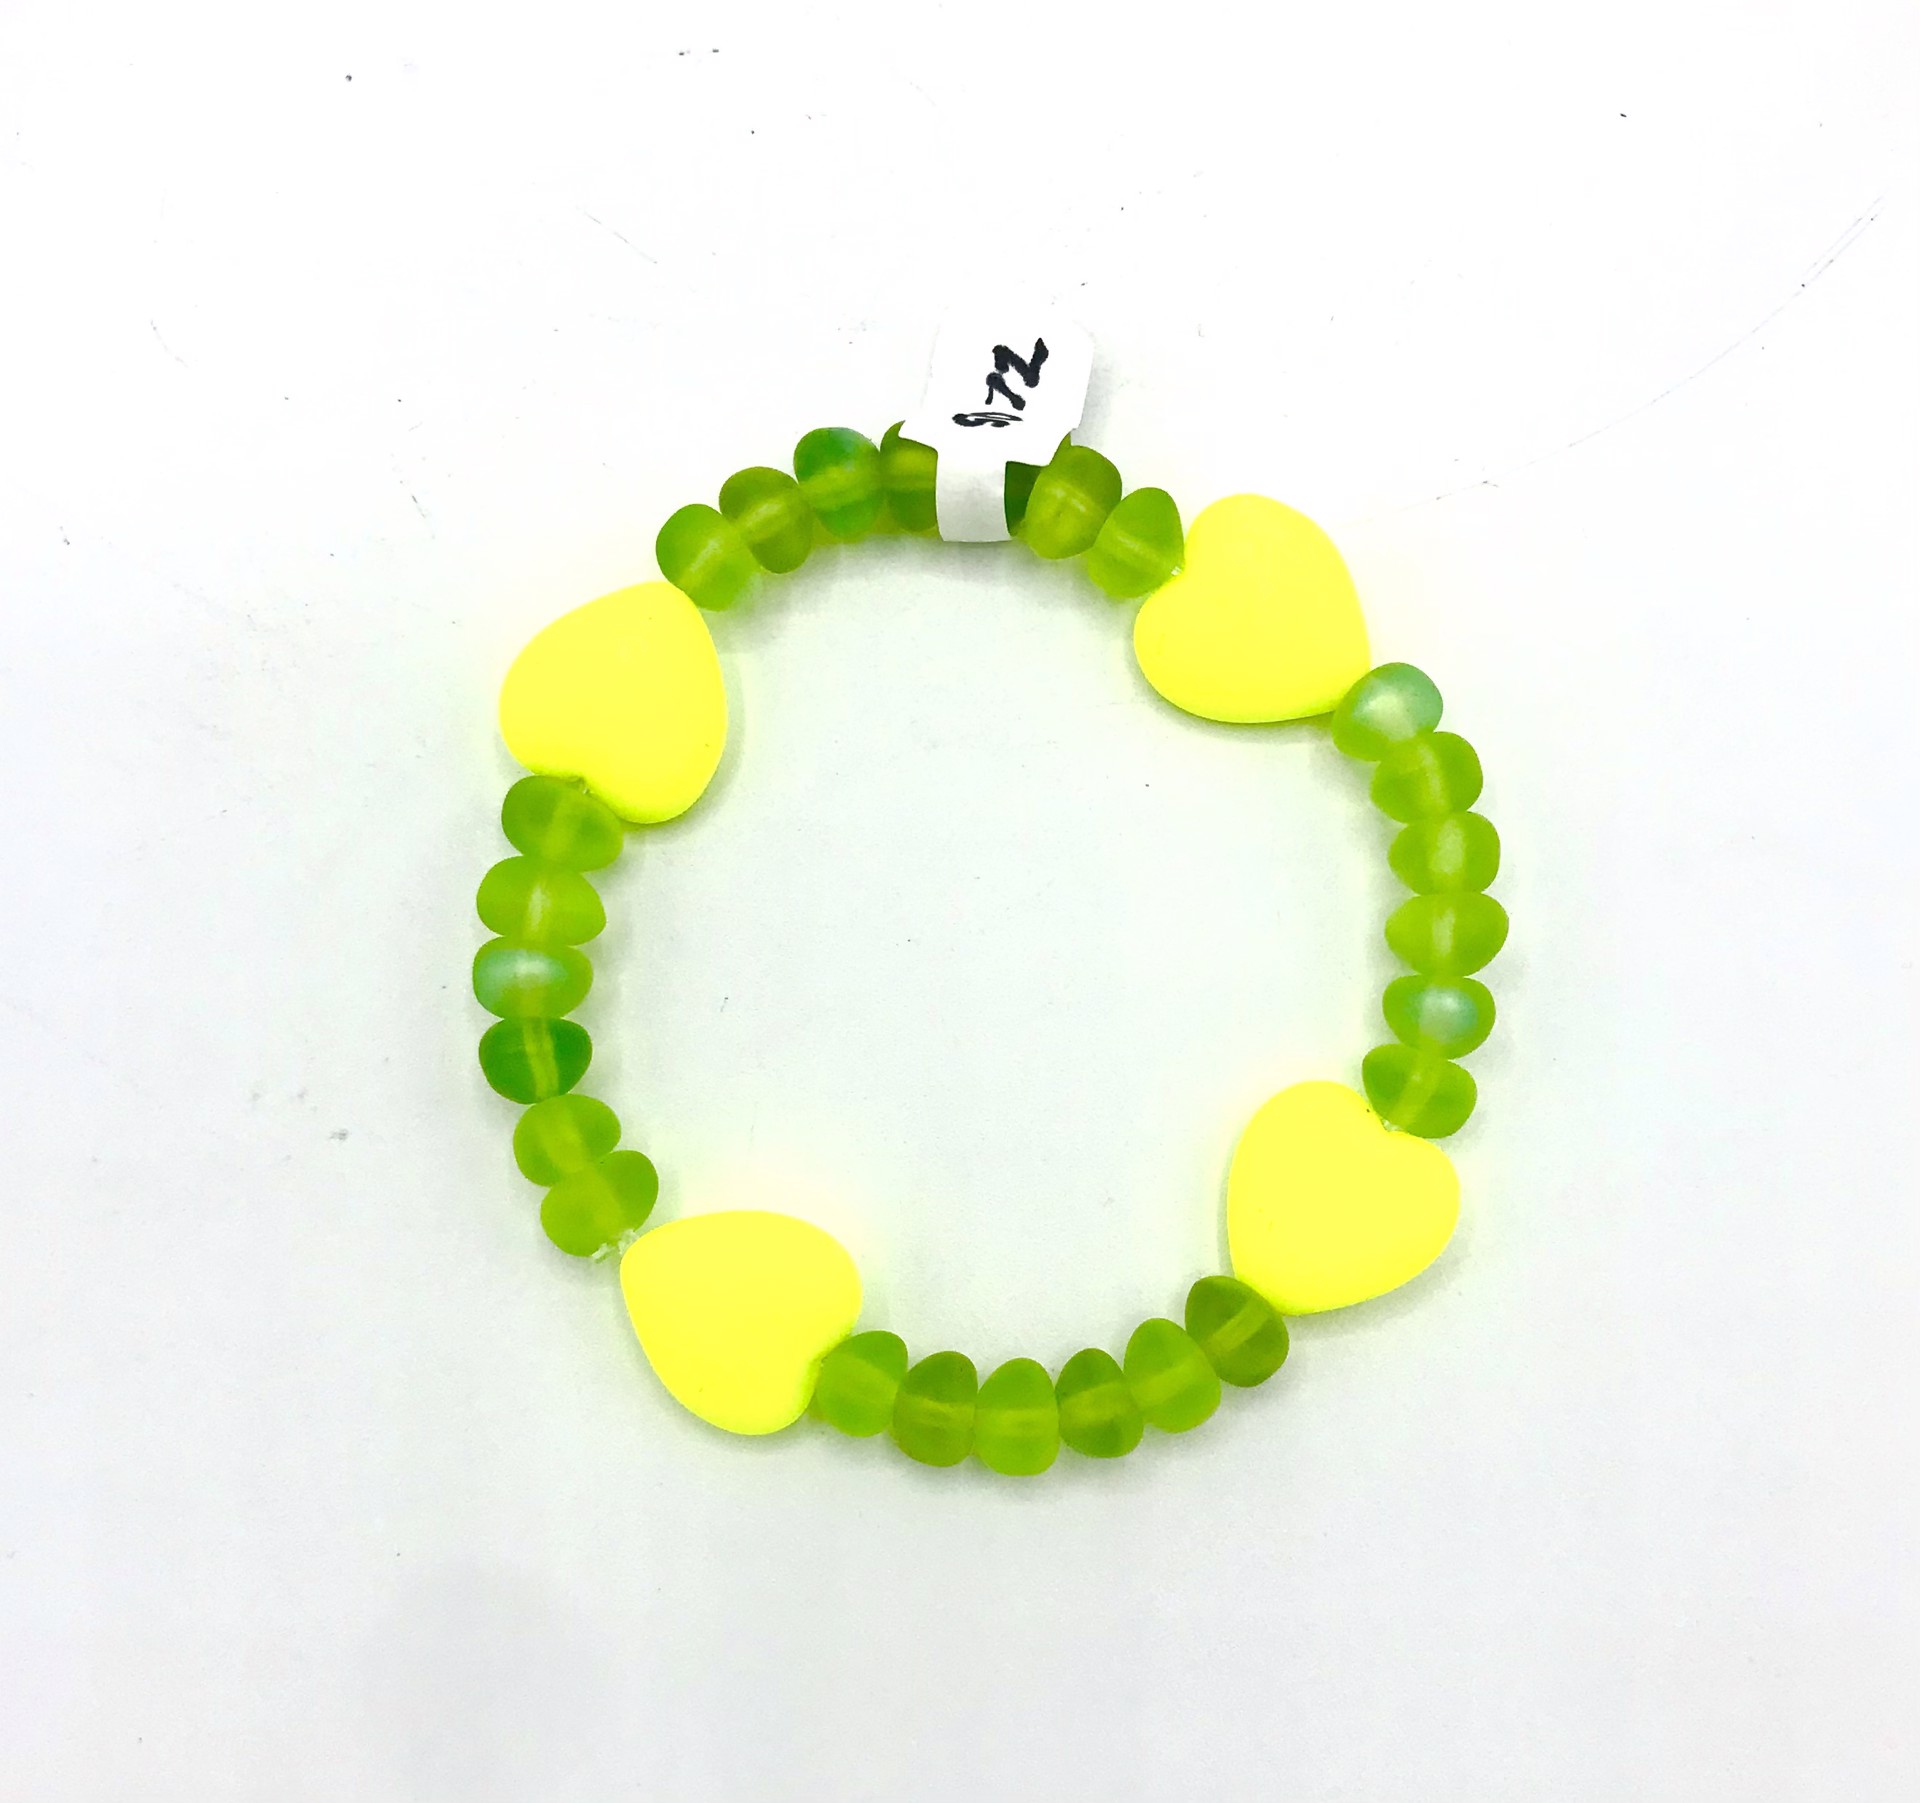 Green With Flowers and Yellow Heart Bracelet by Emelie Hebert